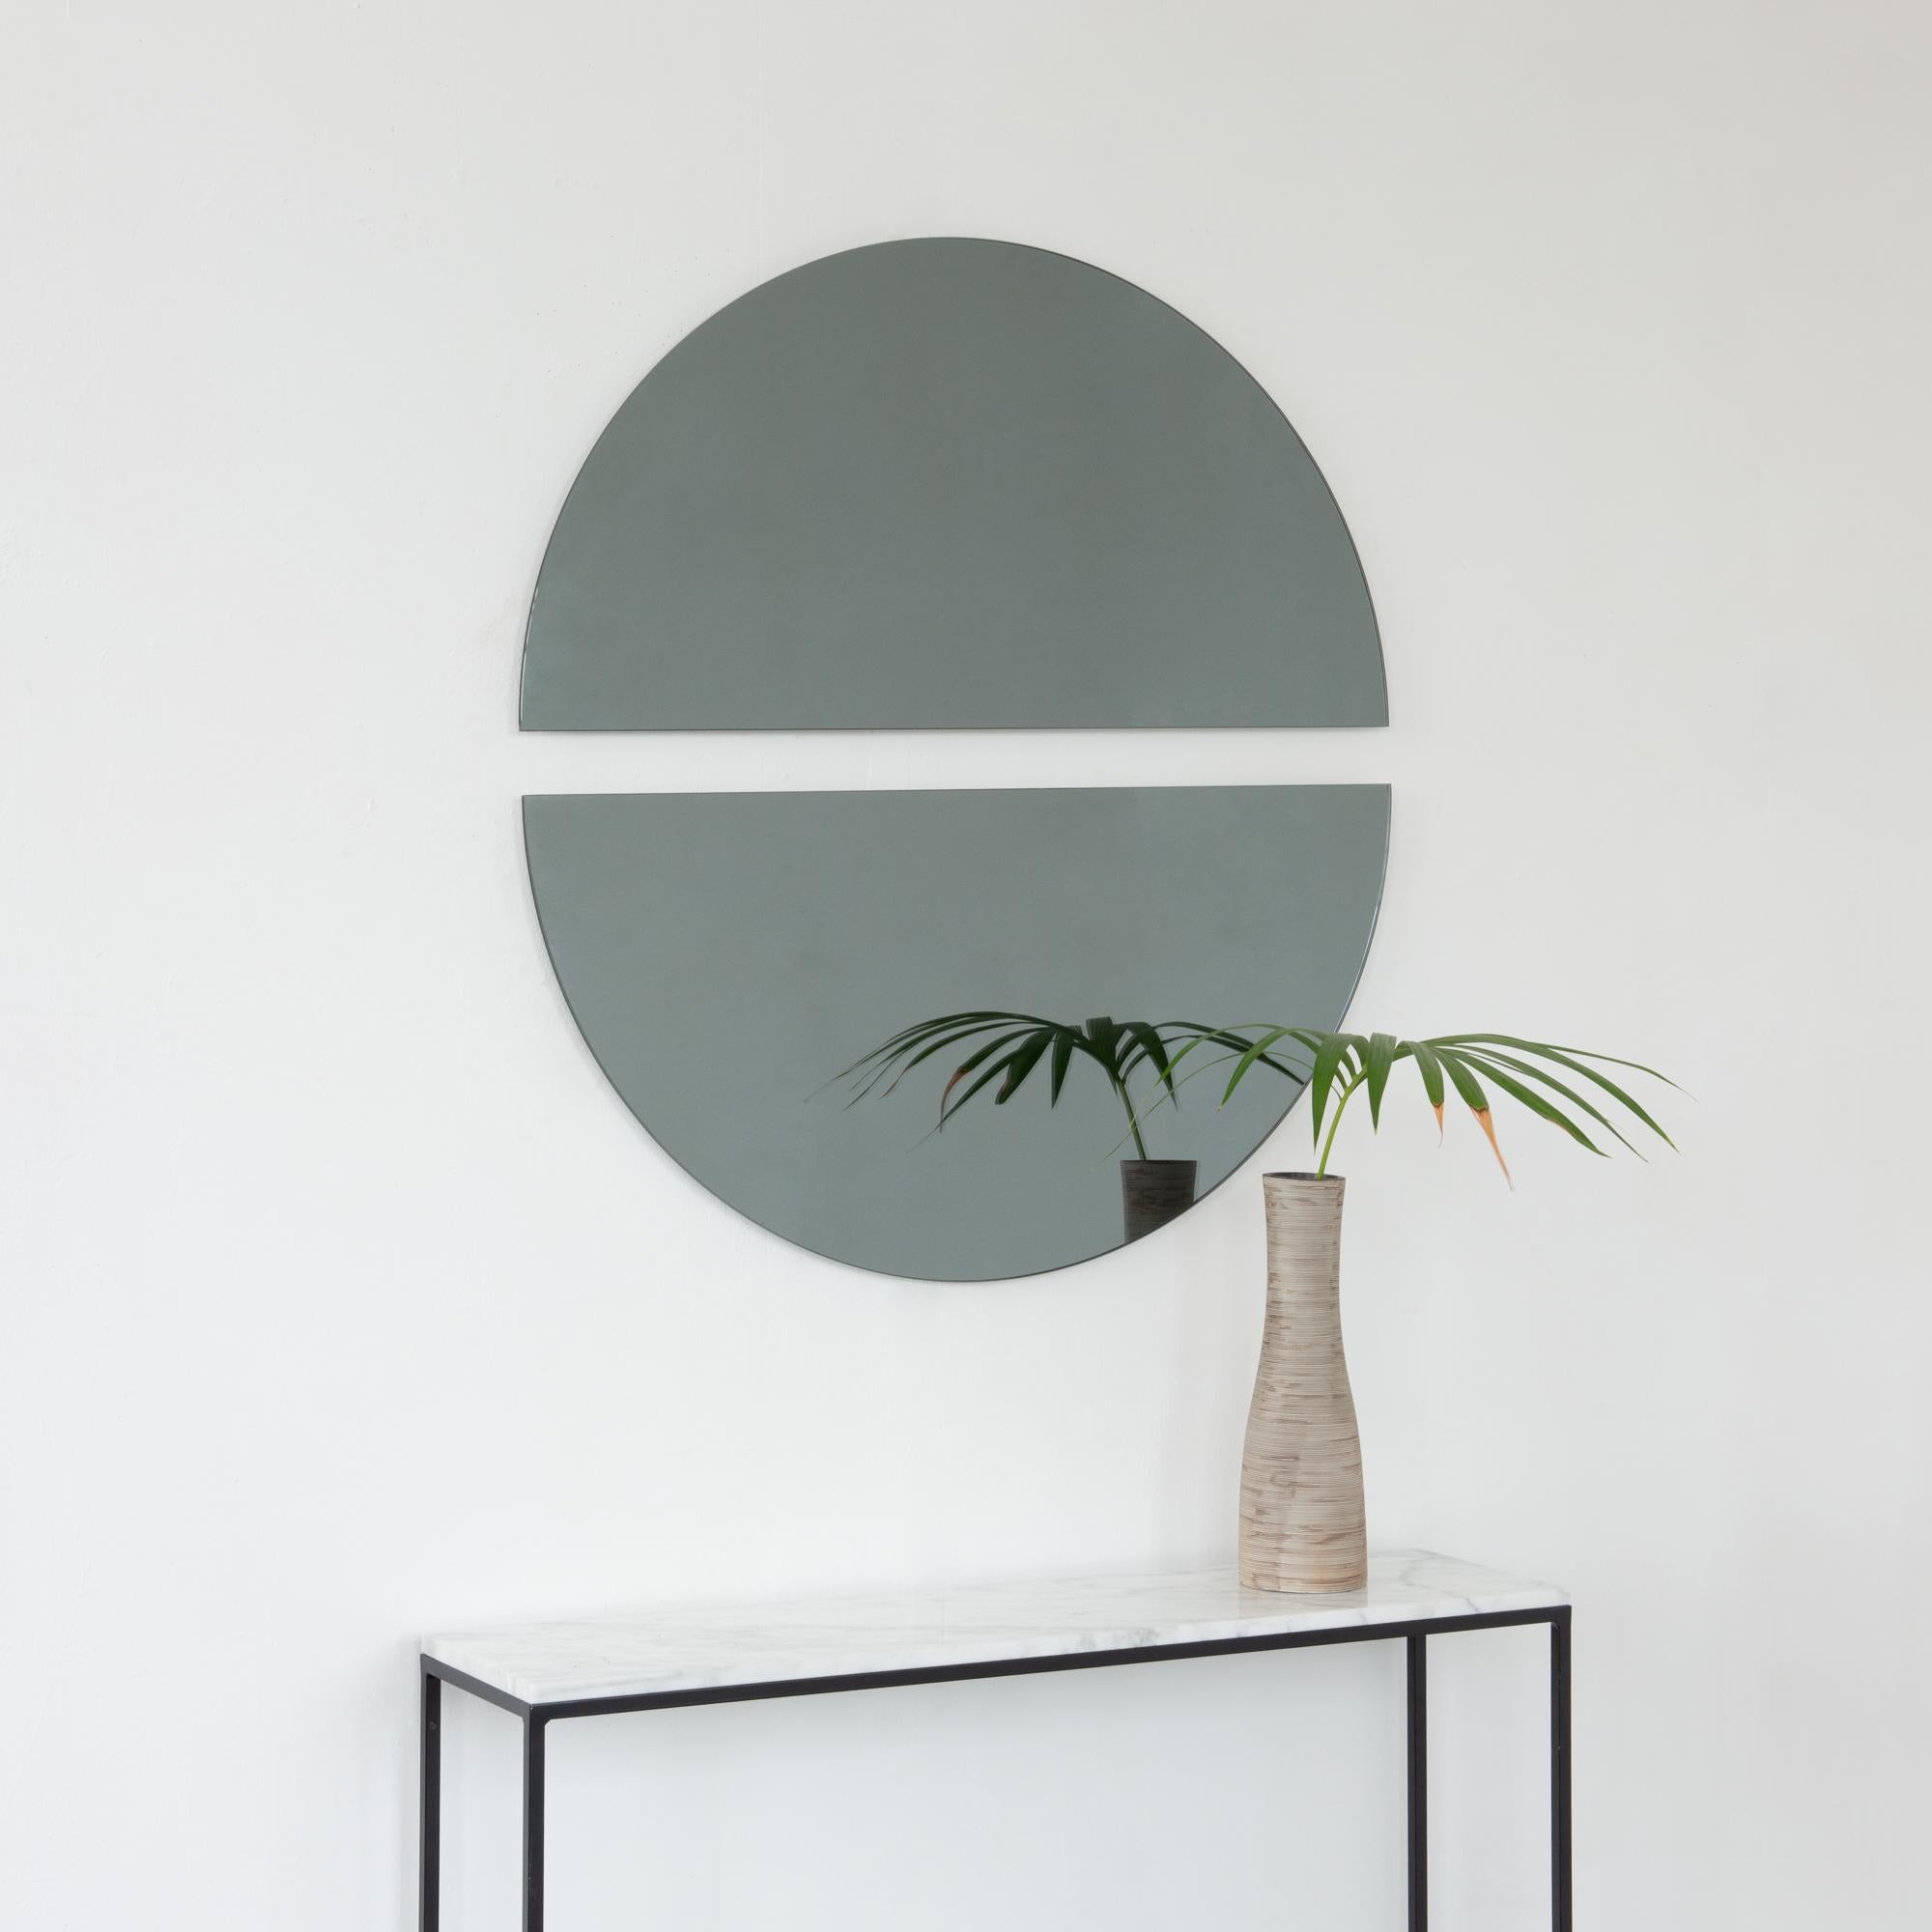 Set of two minimalist half-moon Luna™ black tinted frameless mirrors with a floating effect. Fitted with a quality hanging system for a flexible installation in 4 different directions. Designed and made in London, UK. 

Our mirrors are designed with